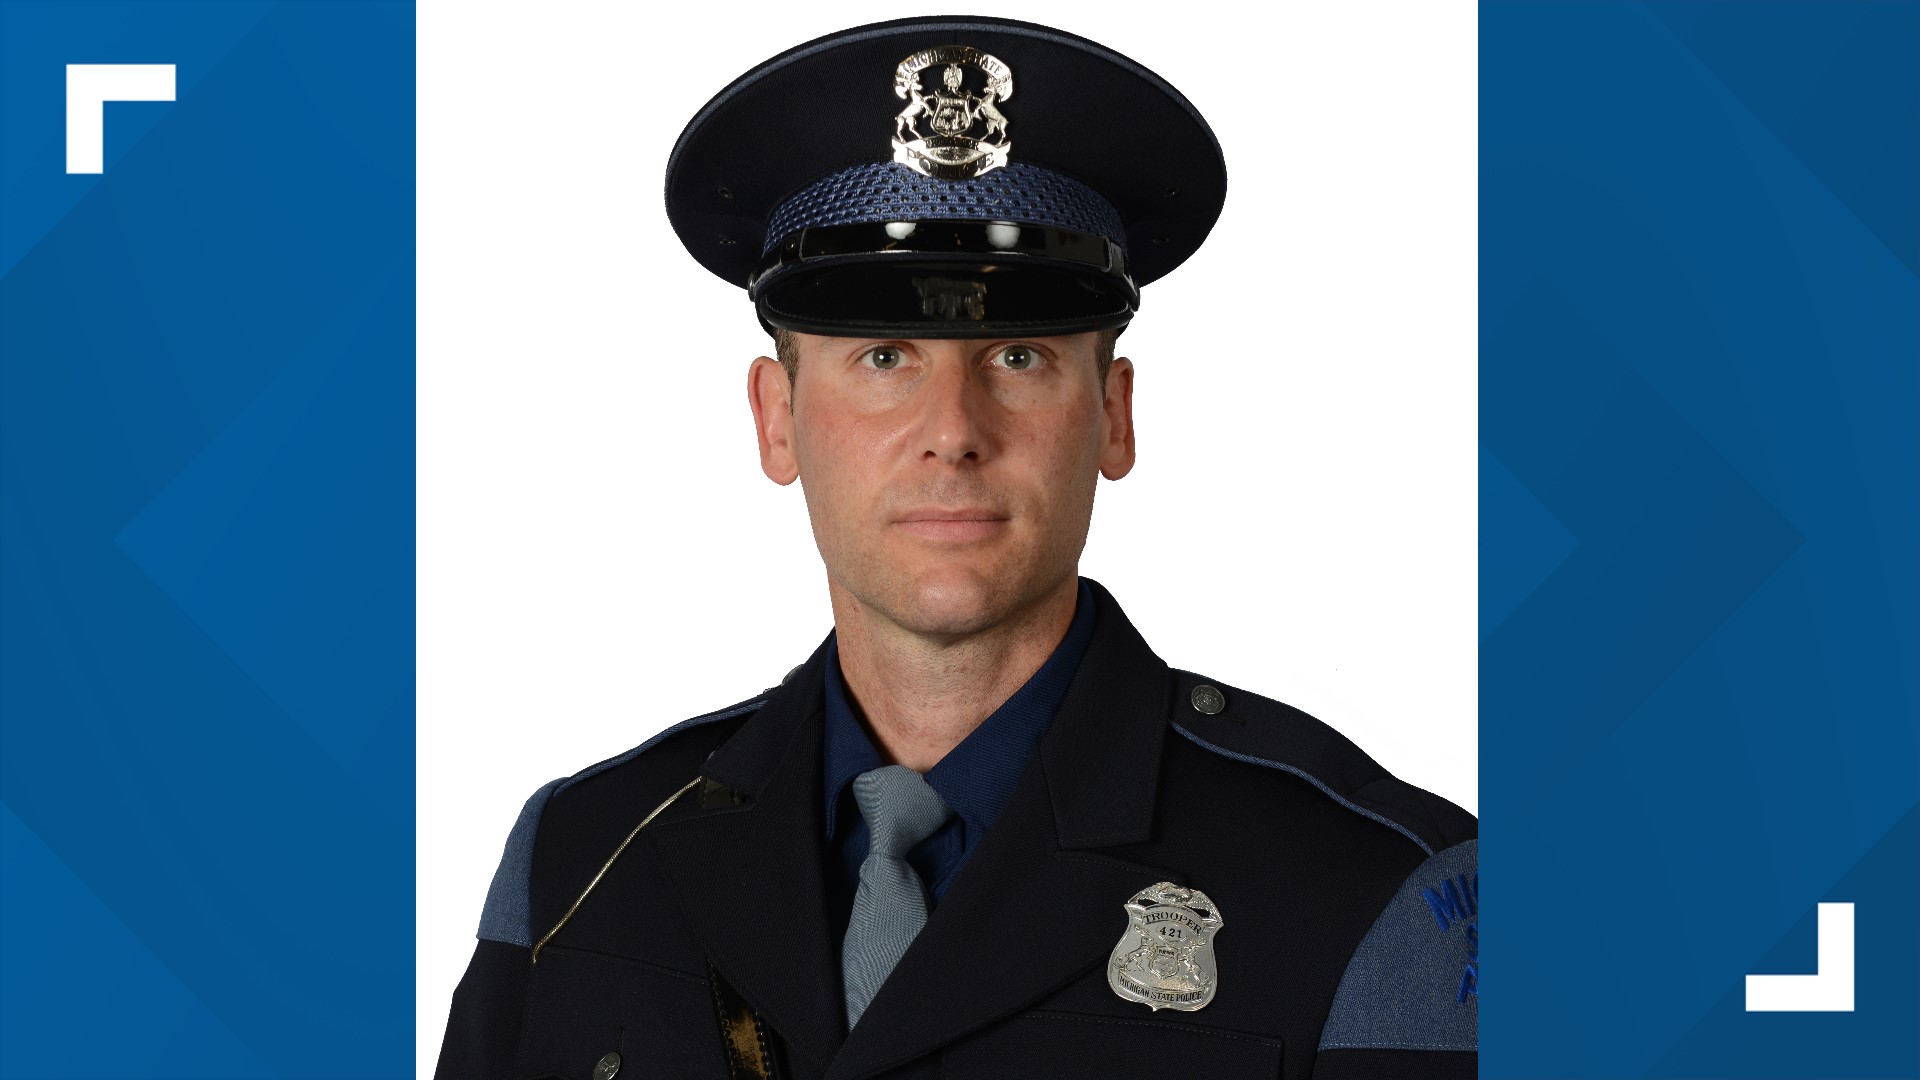 Trooper Joel Popp, 39, served with Michigan State Police since 2020. He is survived by his wife and young daughter.